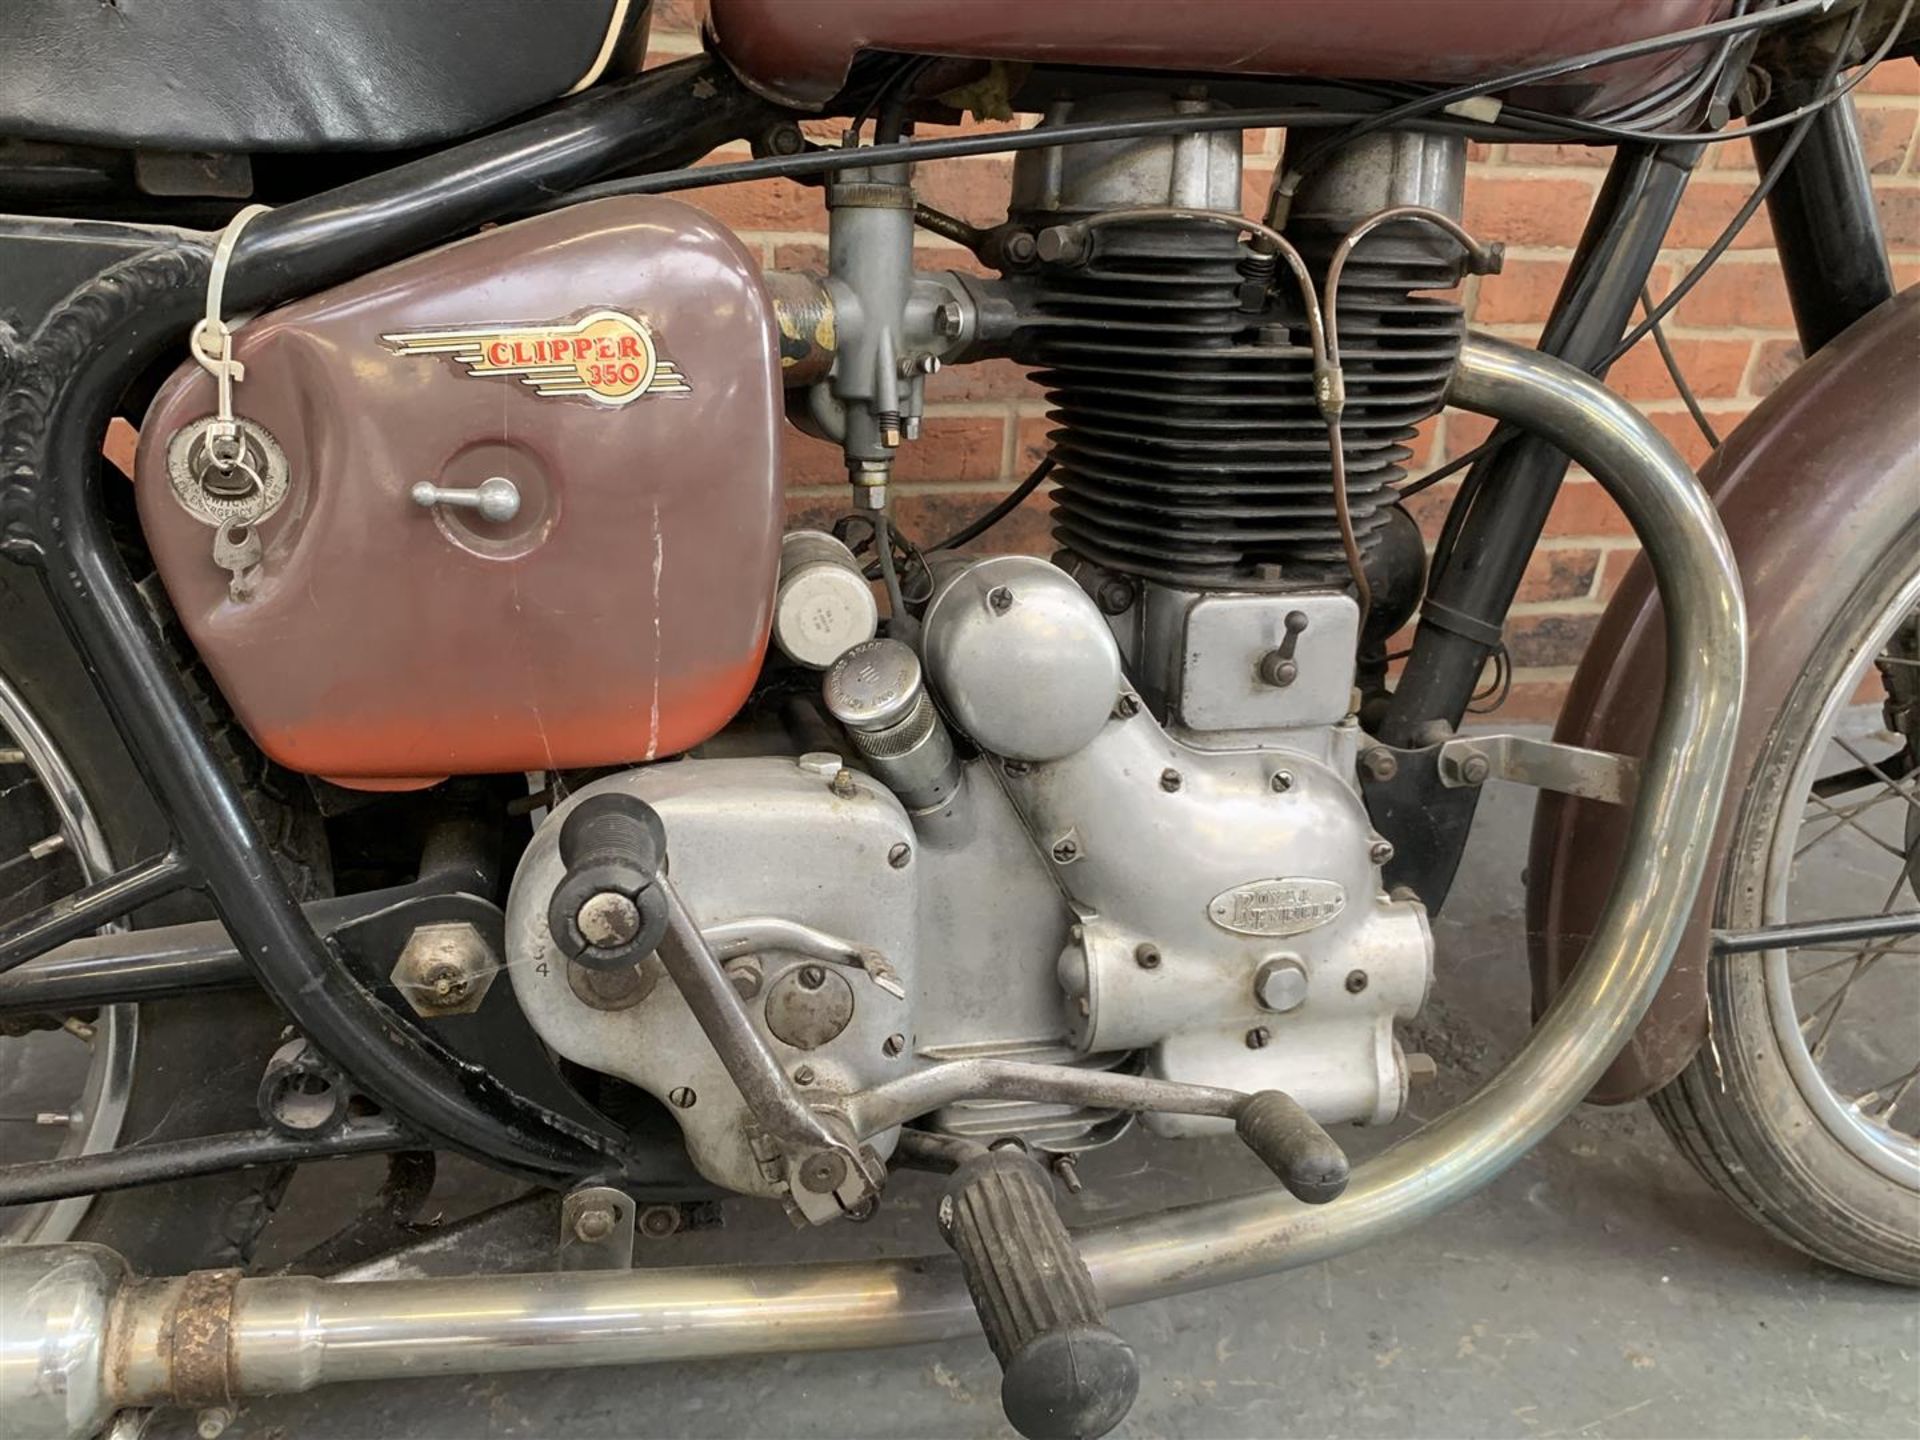 1959 Royal Enfield Clipper 350cc - Image 11 of 16